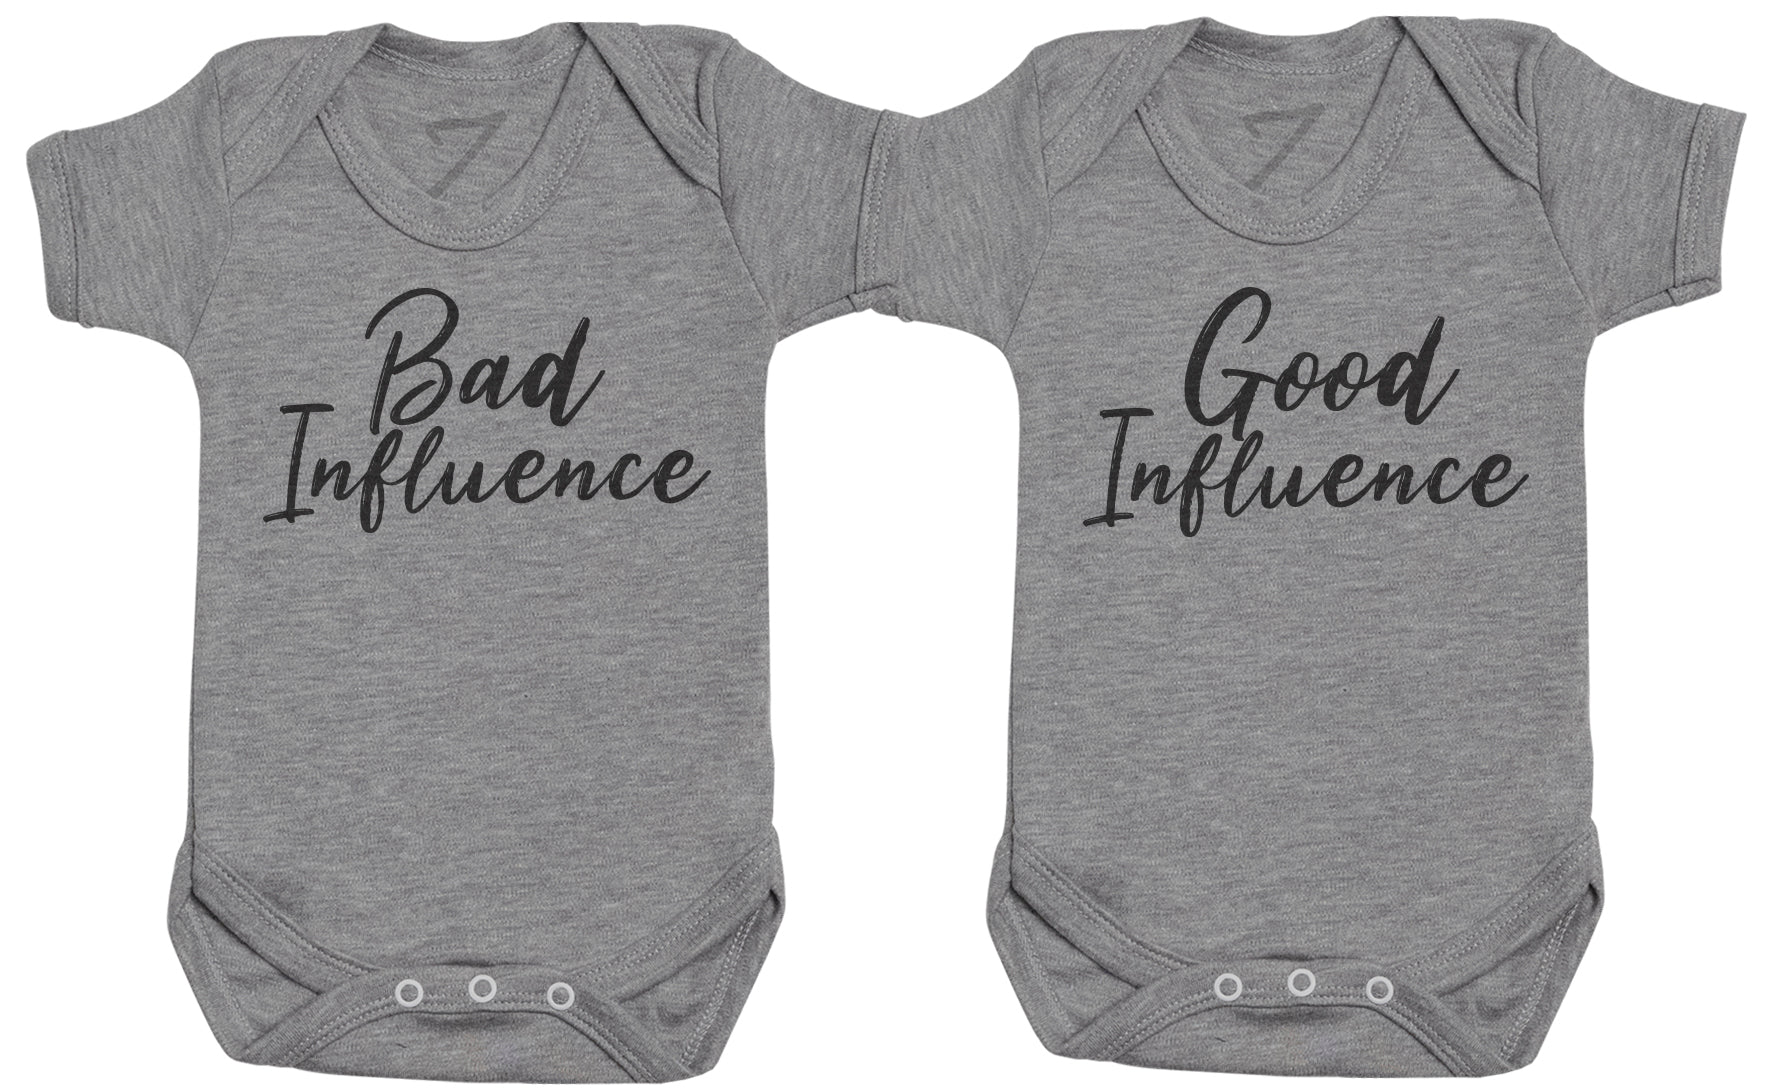 Good And Bad Influence - Twin Set - Selection of Clothing Set - (0M to 14 yrs)